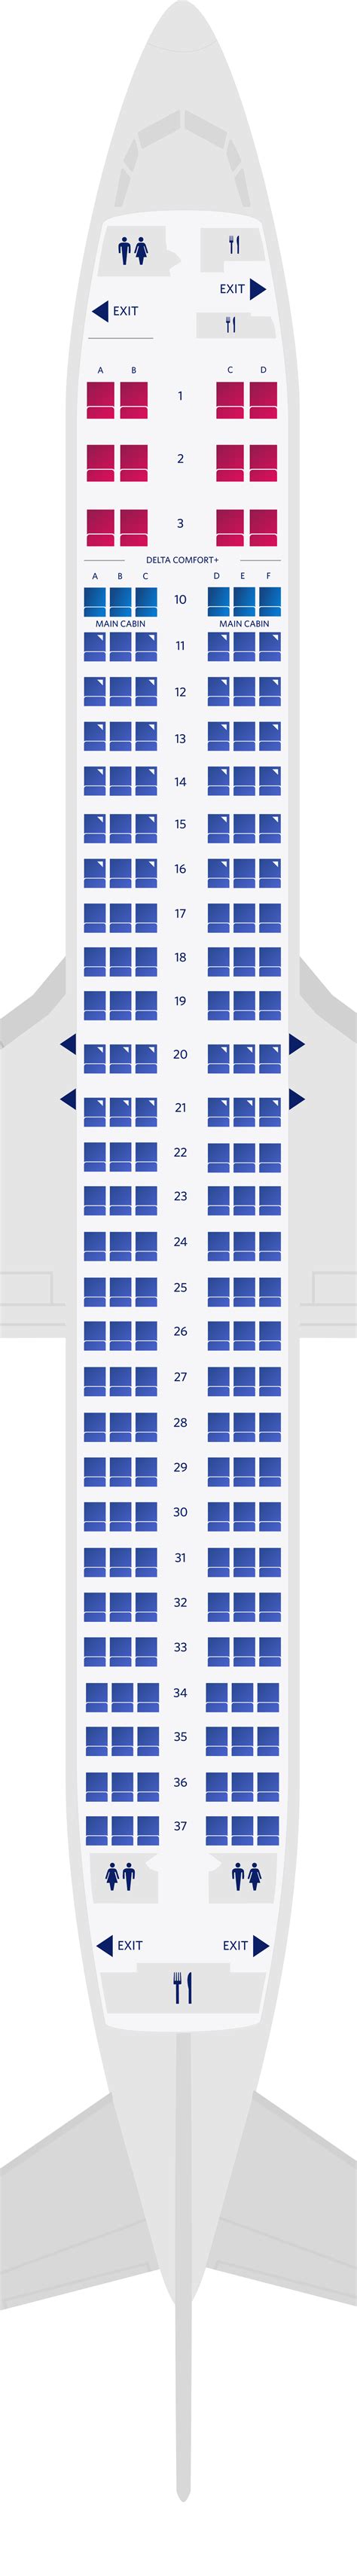 Boeing 737 900 Seating Chart Delta Awesome Home